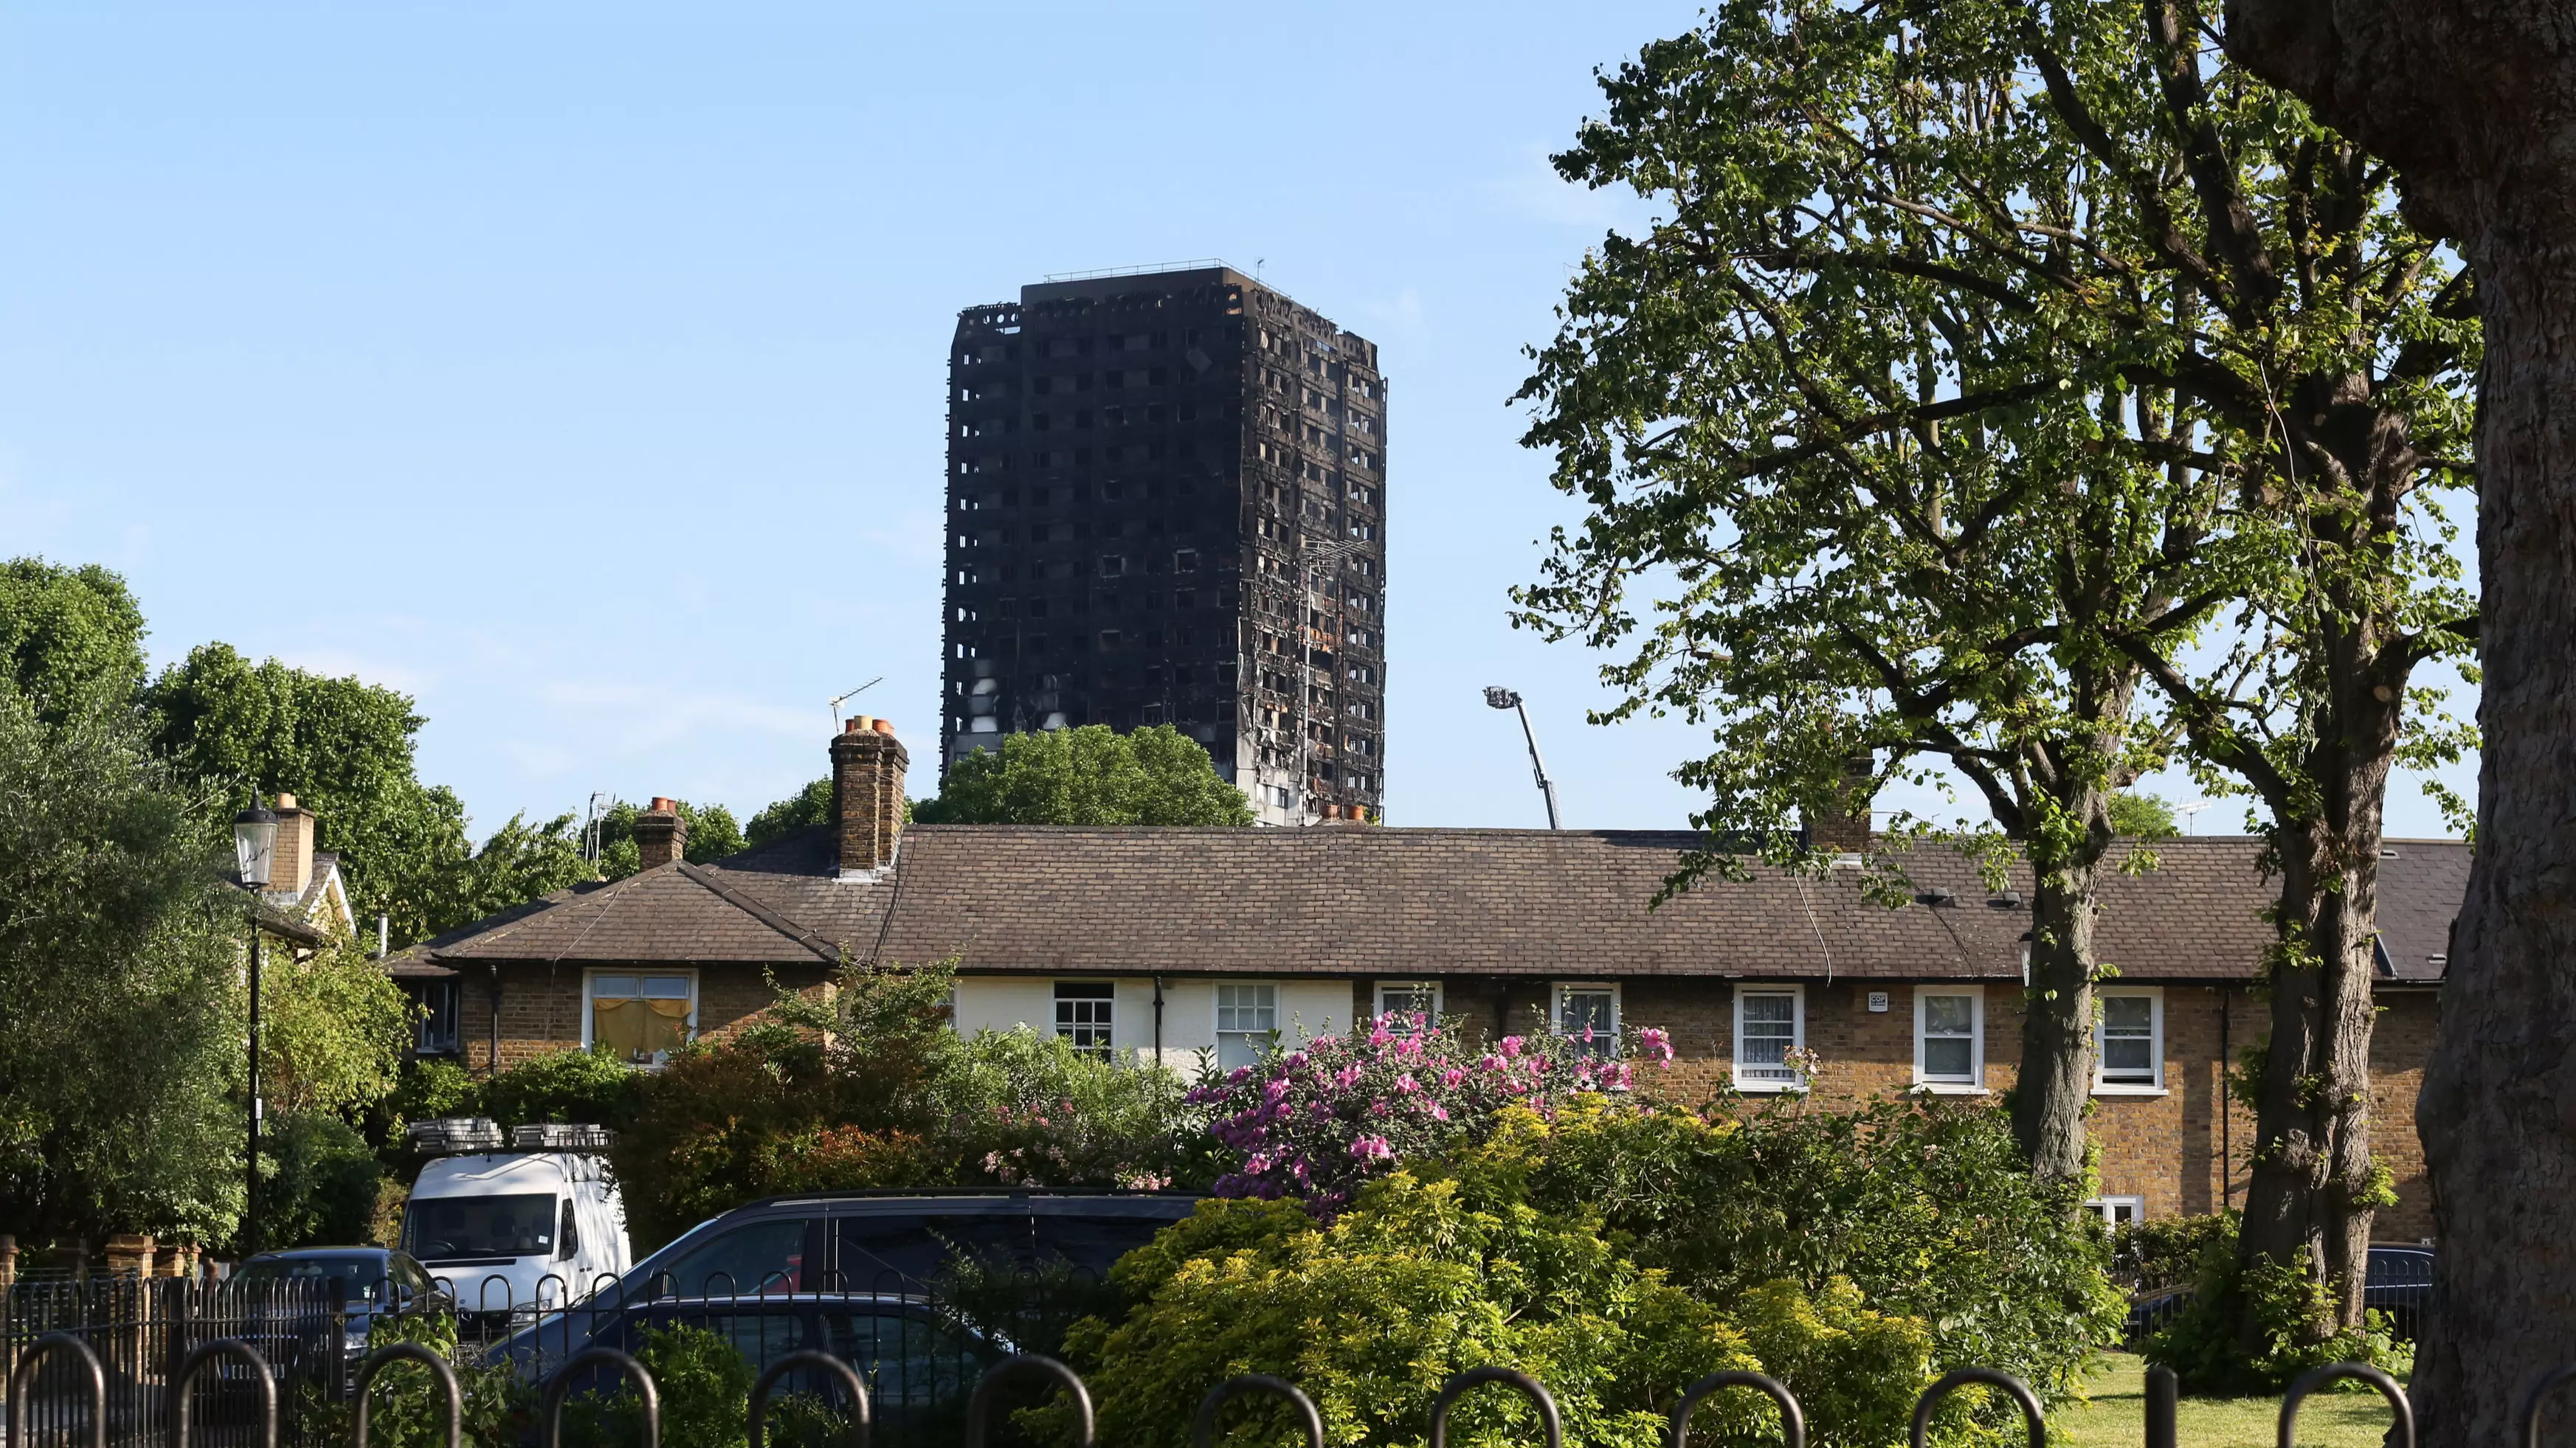 Death Toll From Grenfell Tower Blaze Reaches 79